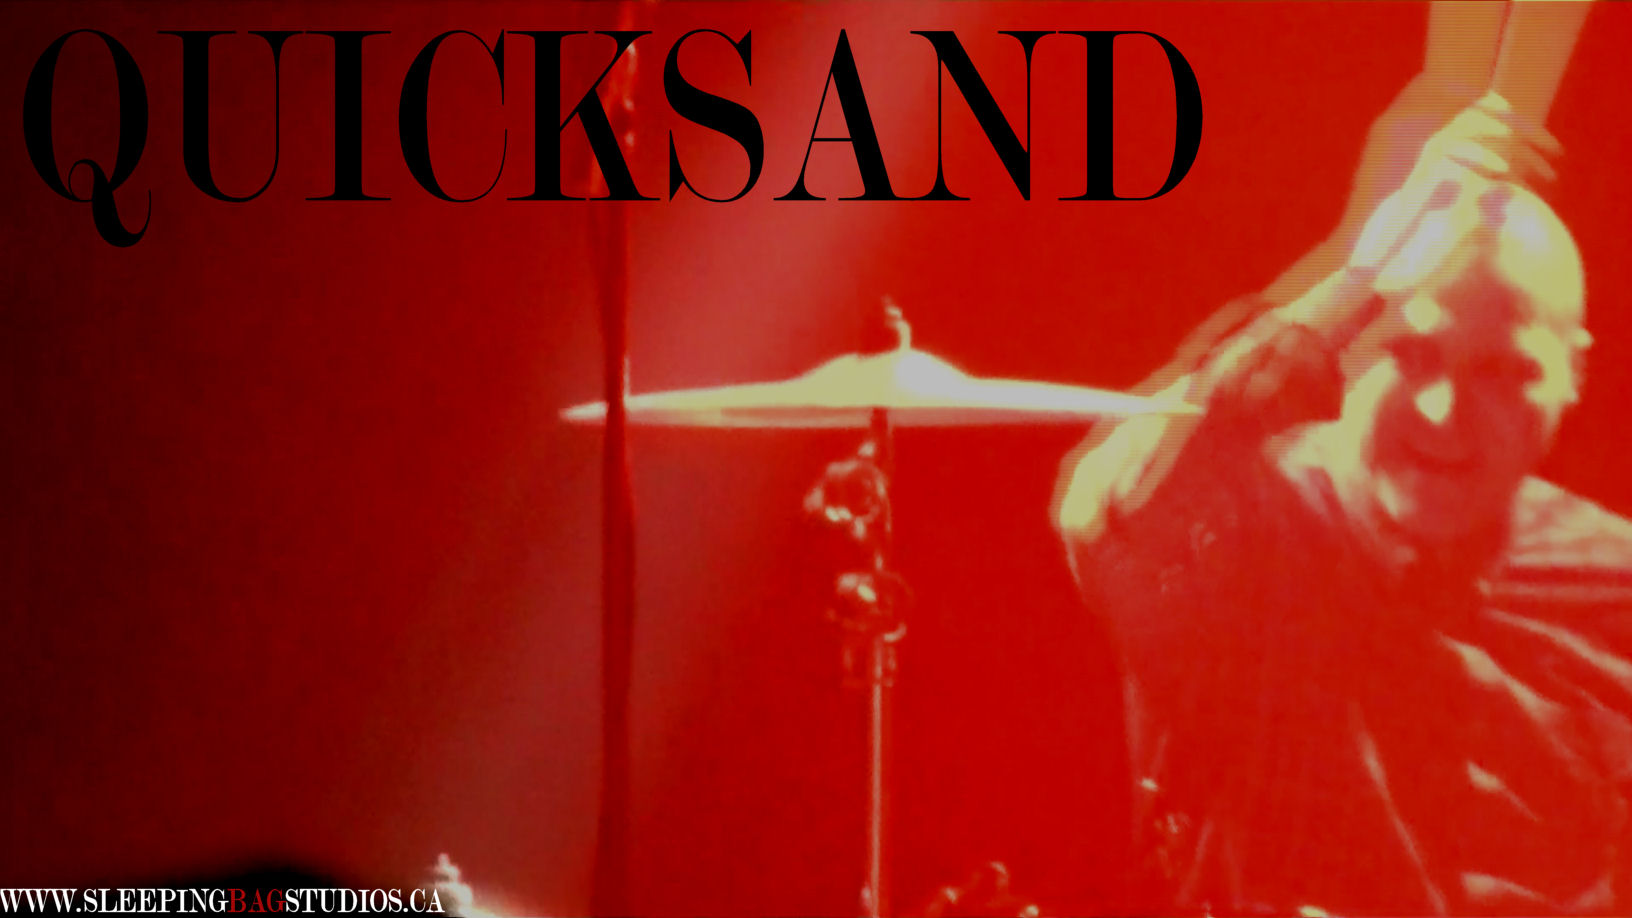  Quicksand – “Unfulfilled” (Live @ The Commodore 2013)